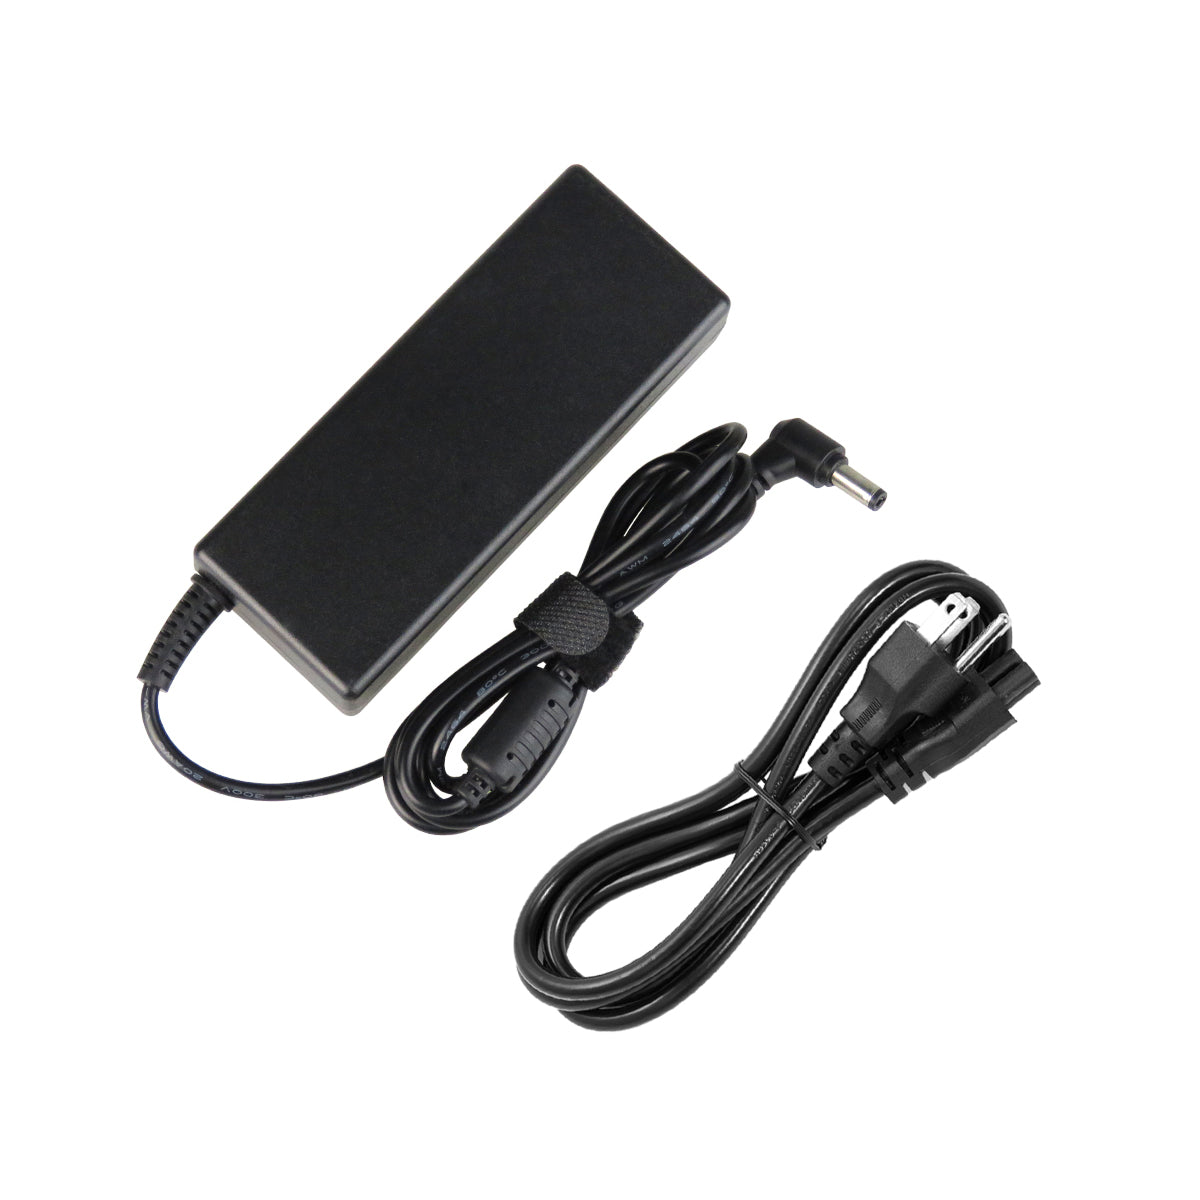 AC Adapter Charger for Lenovo IdeaPad Y500 Notebook.